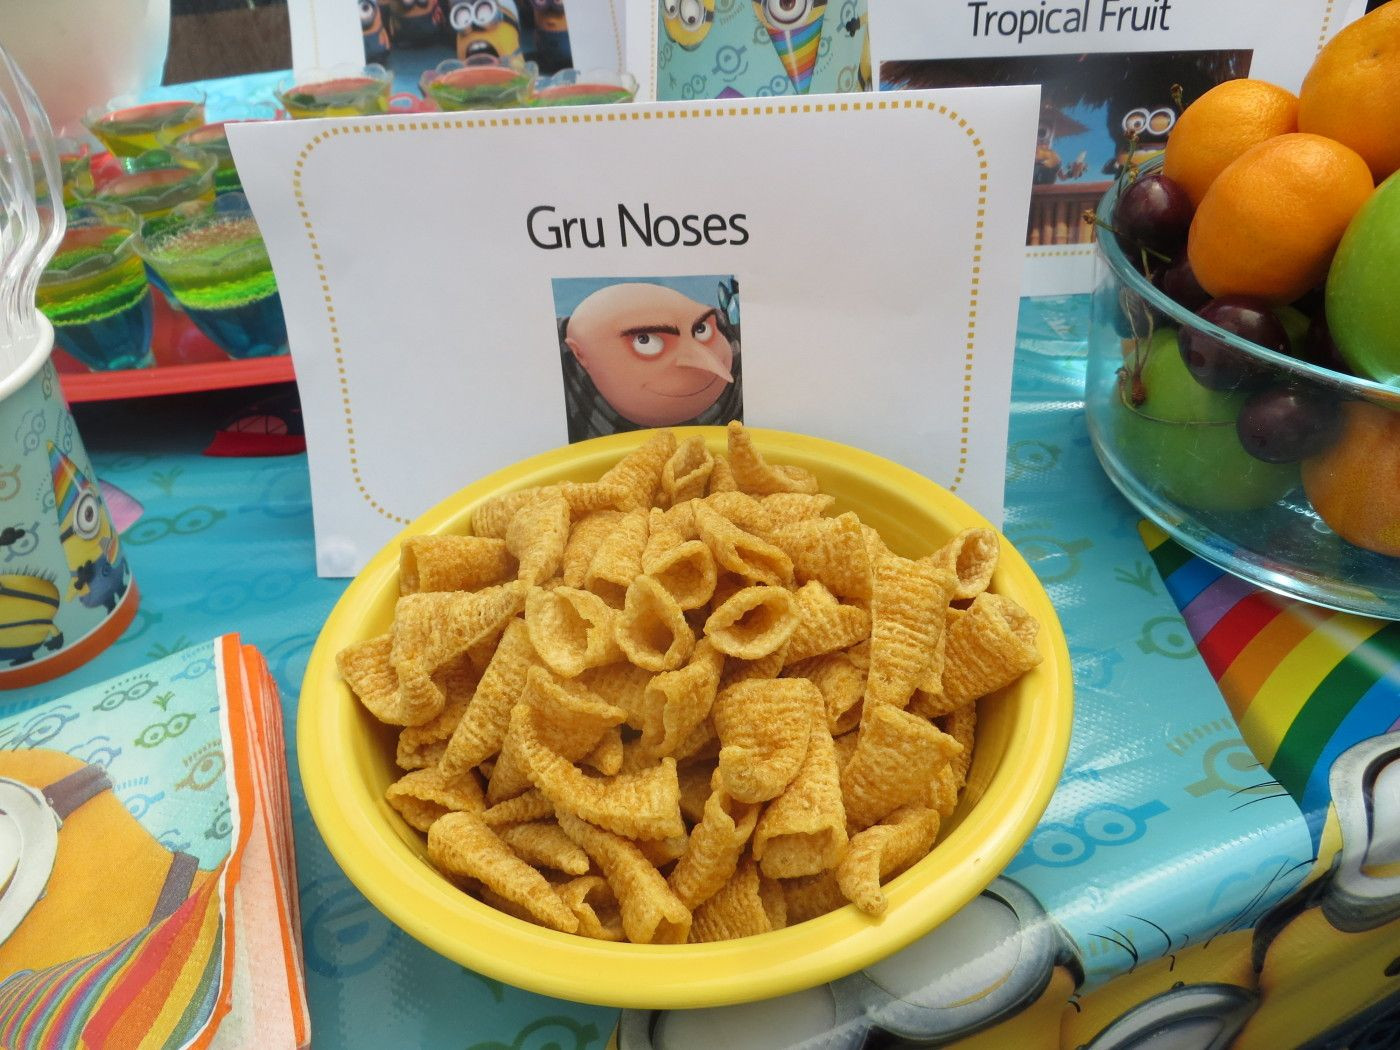 Minion Party Ideas Food
 "Gru Noses" using bugal chips Food Idea for Despicable Me